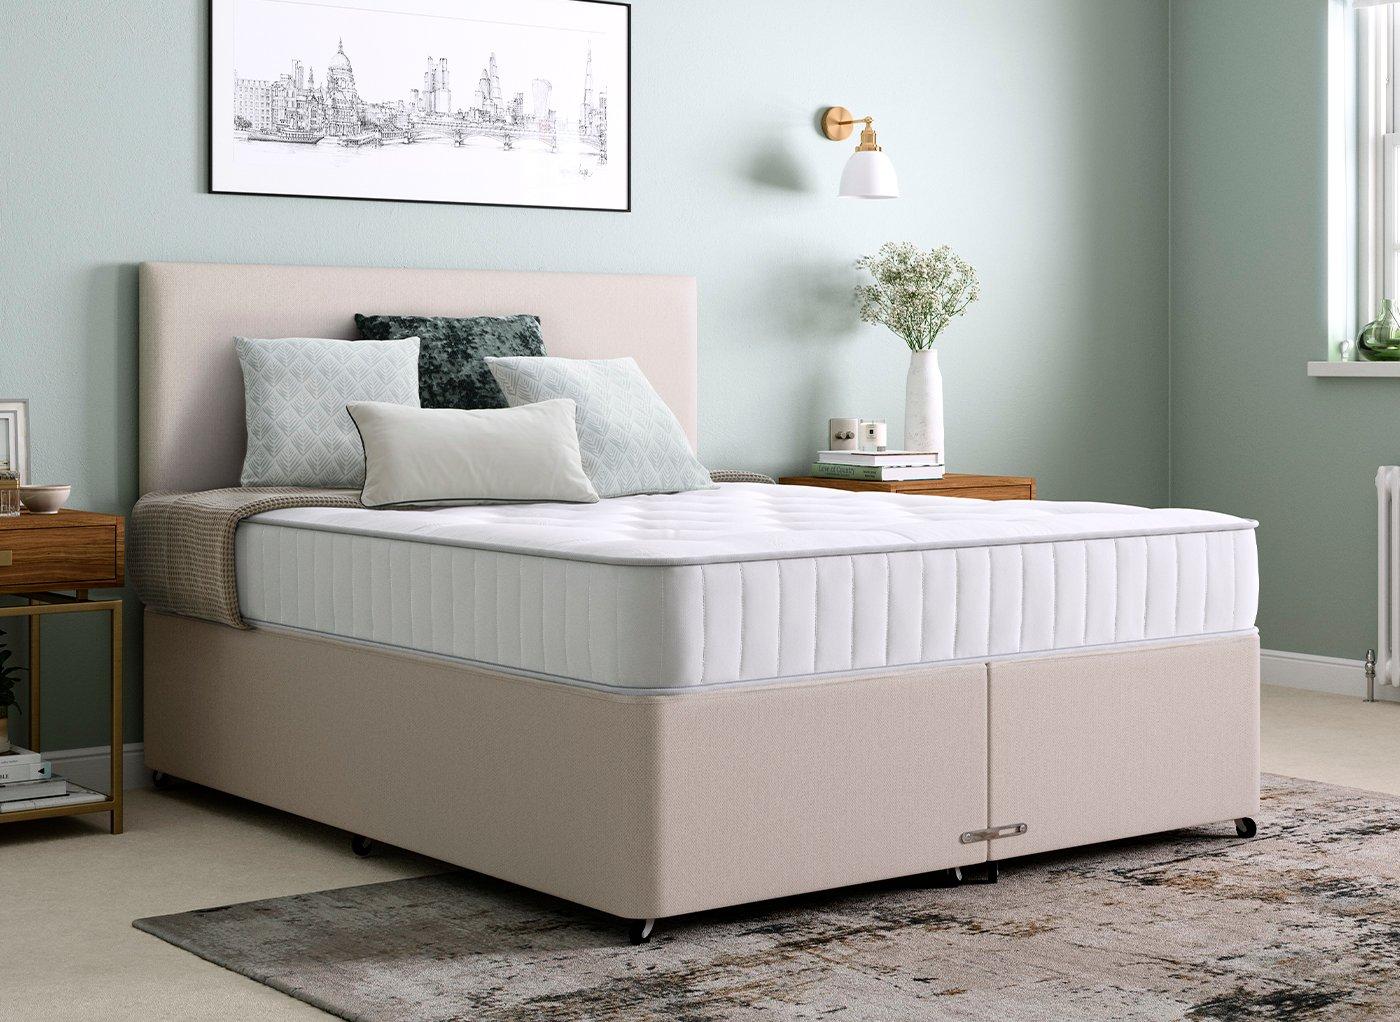 Turner Traditional Spring Mattress Size Dreams